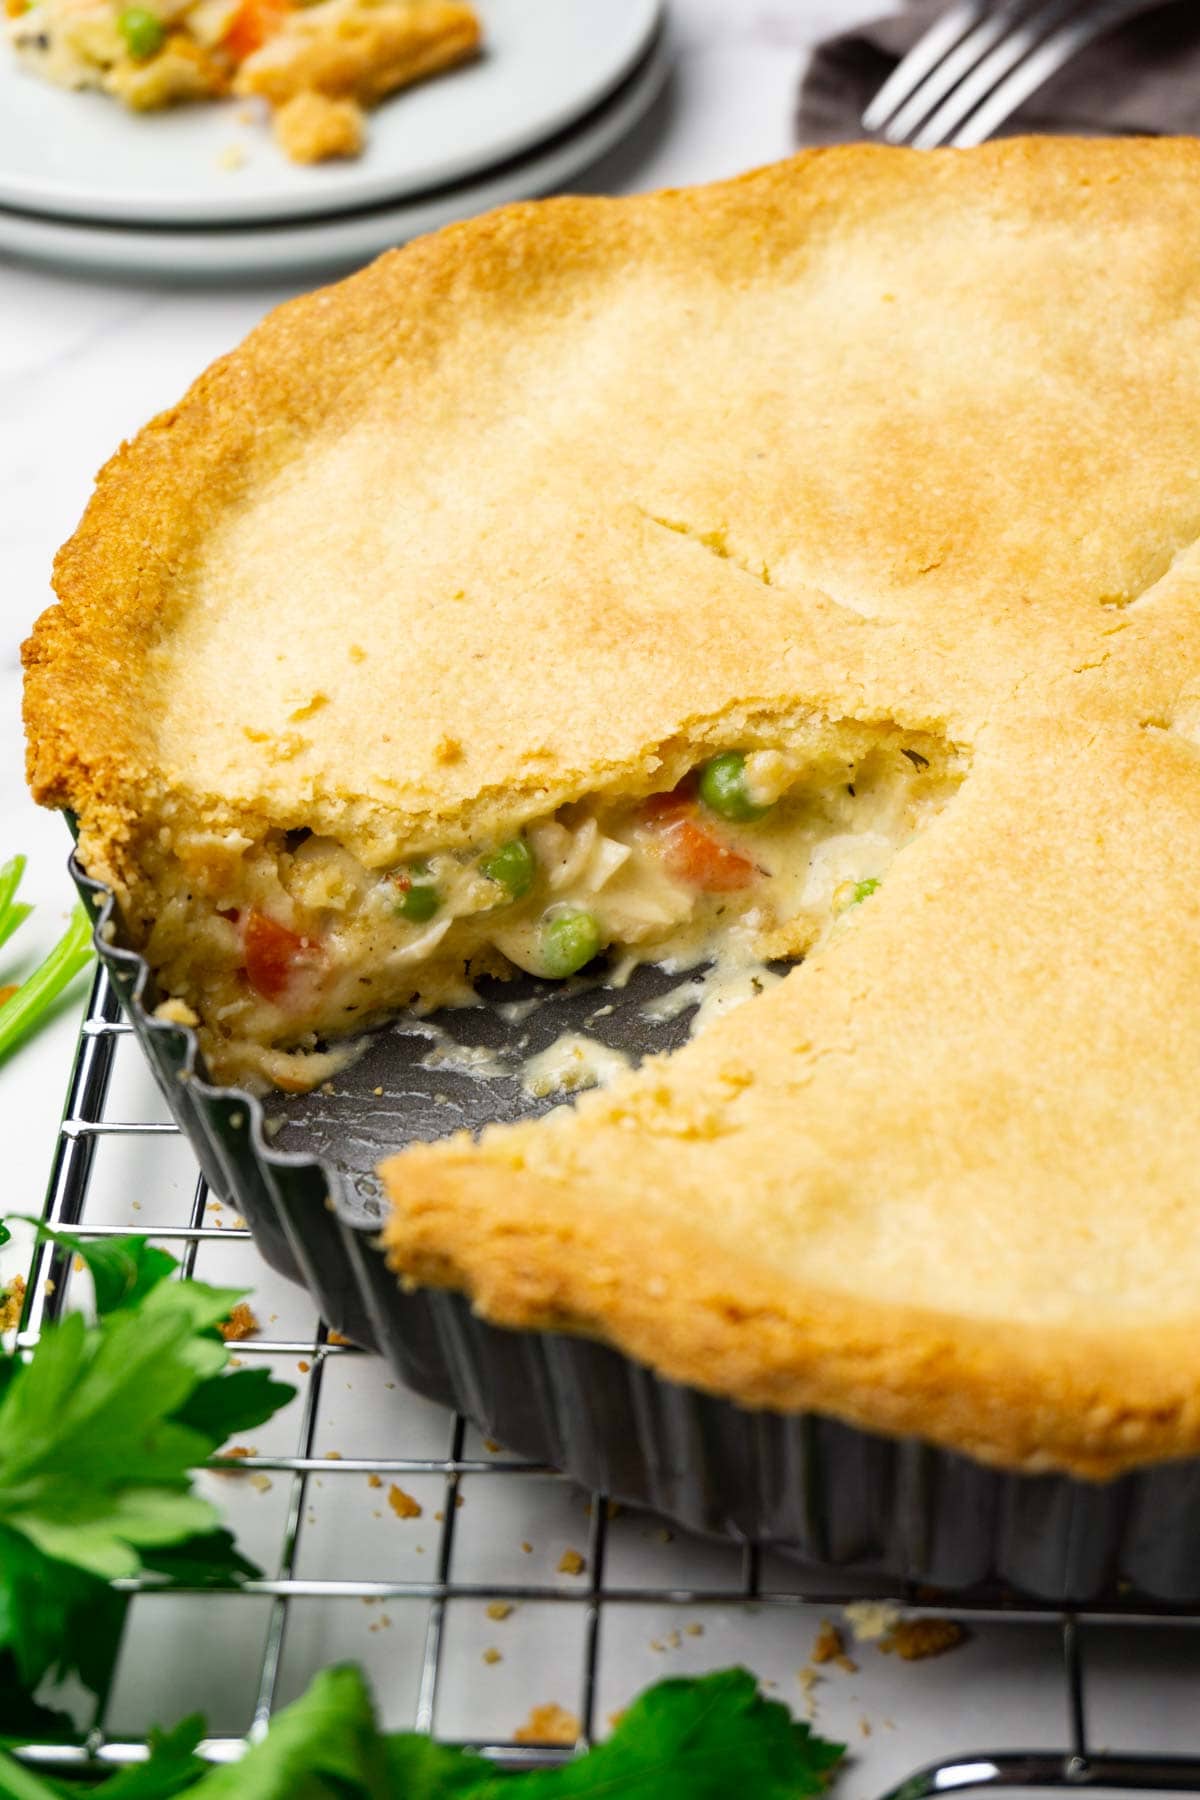 Chicken pot pie in a pie dish standing on a cooling rack, one slice taken.